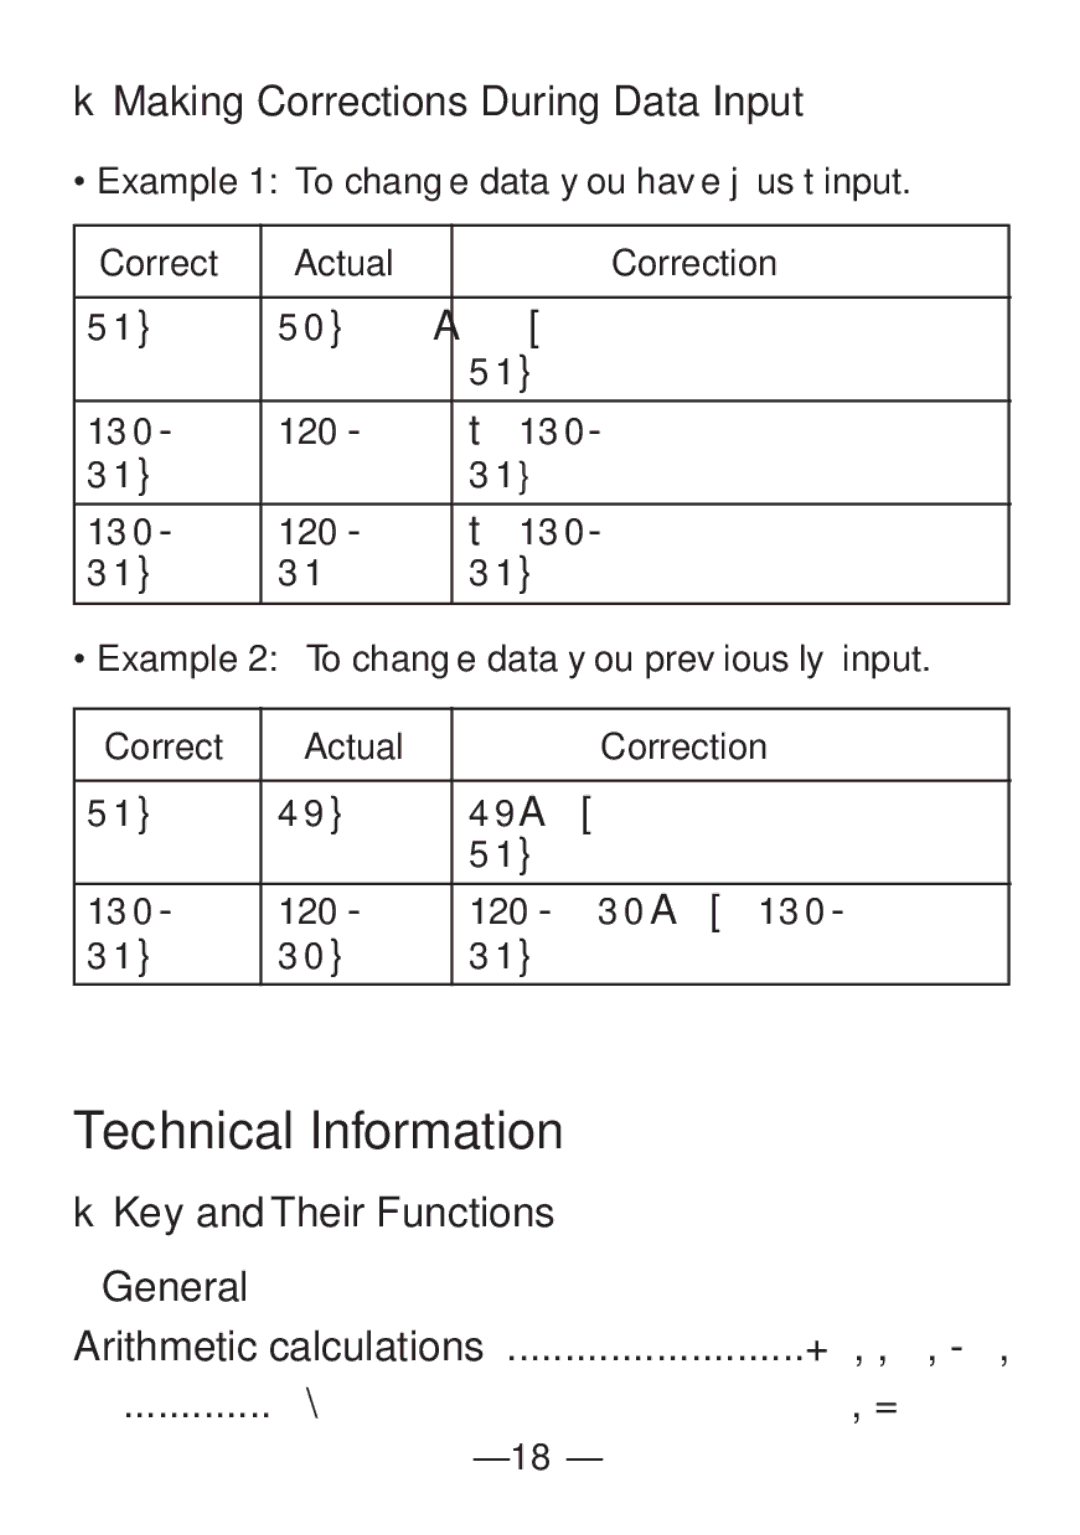 Casio FX-82SX manual Technical Information, KMaking Corrections During Data Input, KKey and Their Functions General 